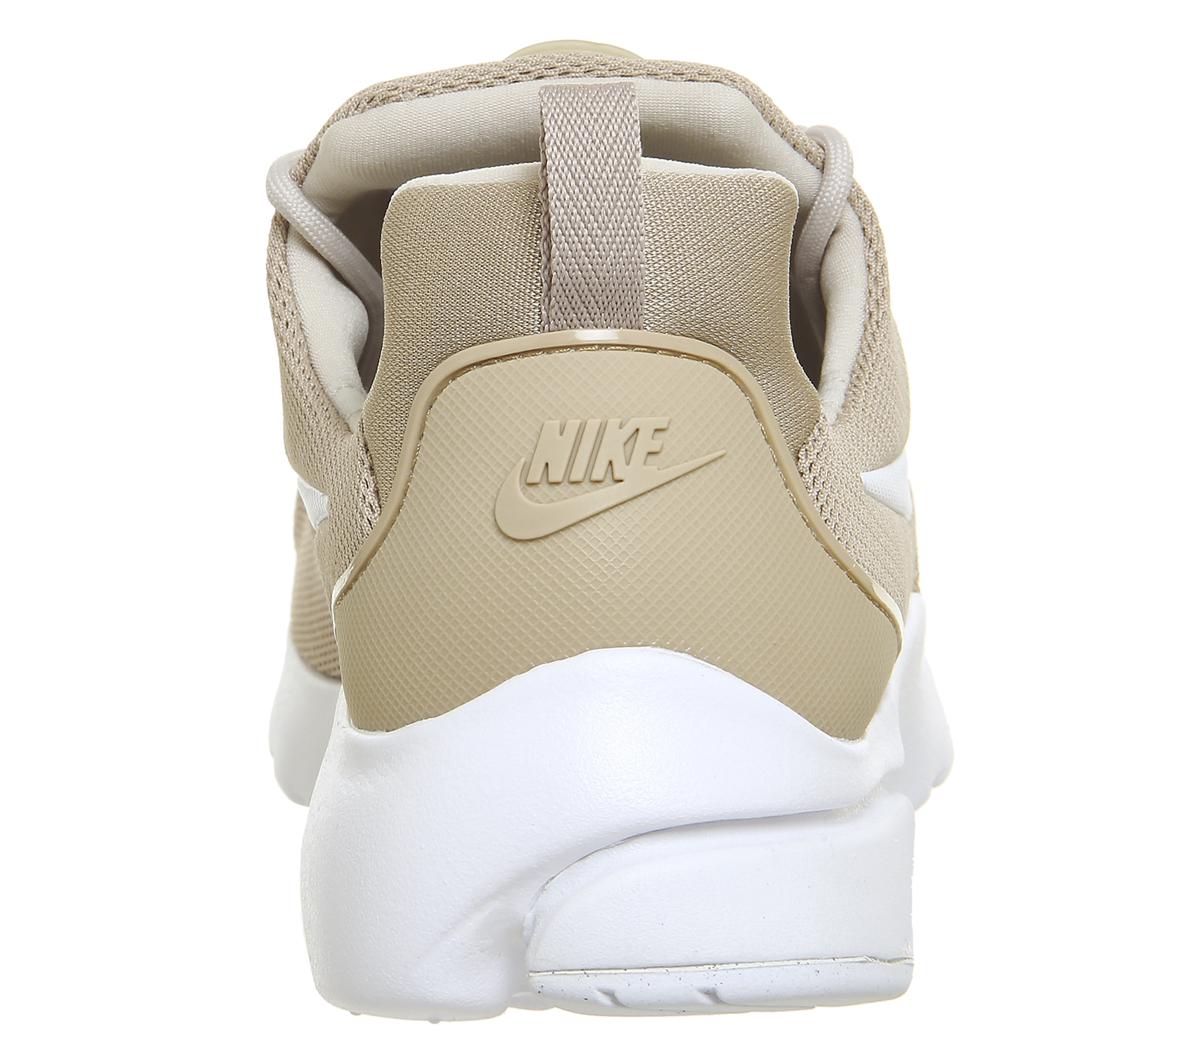 Nike Presto Fly in Sand (Natural) - Lyst